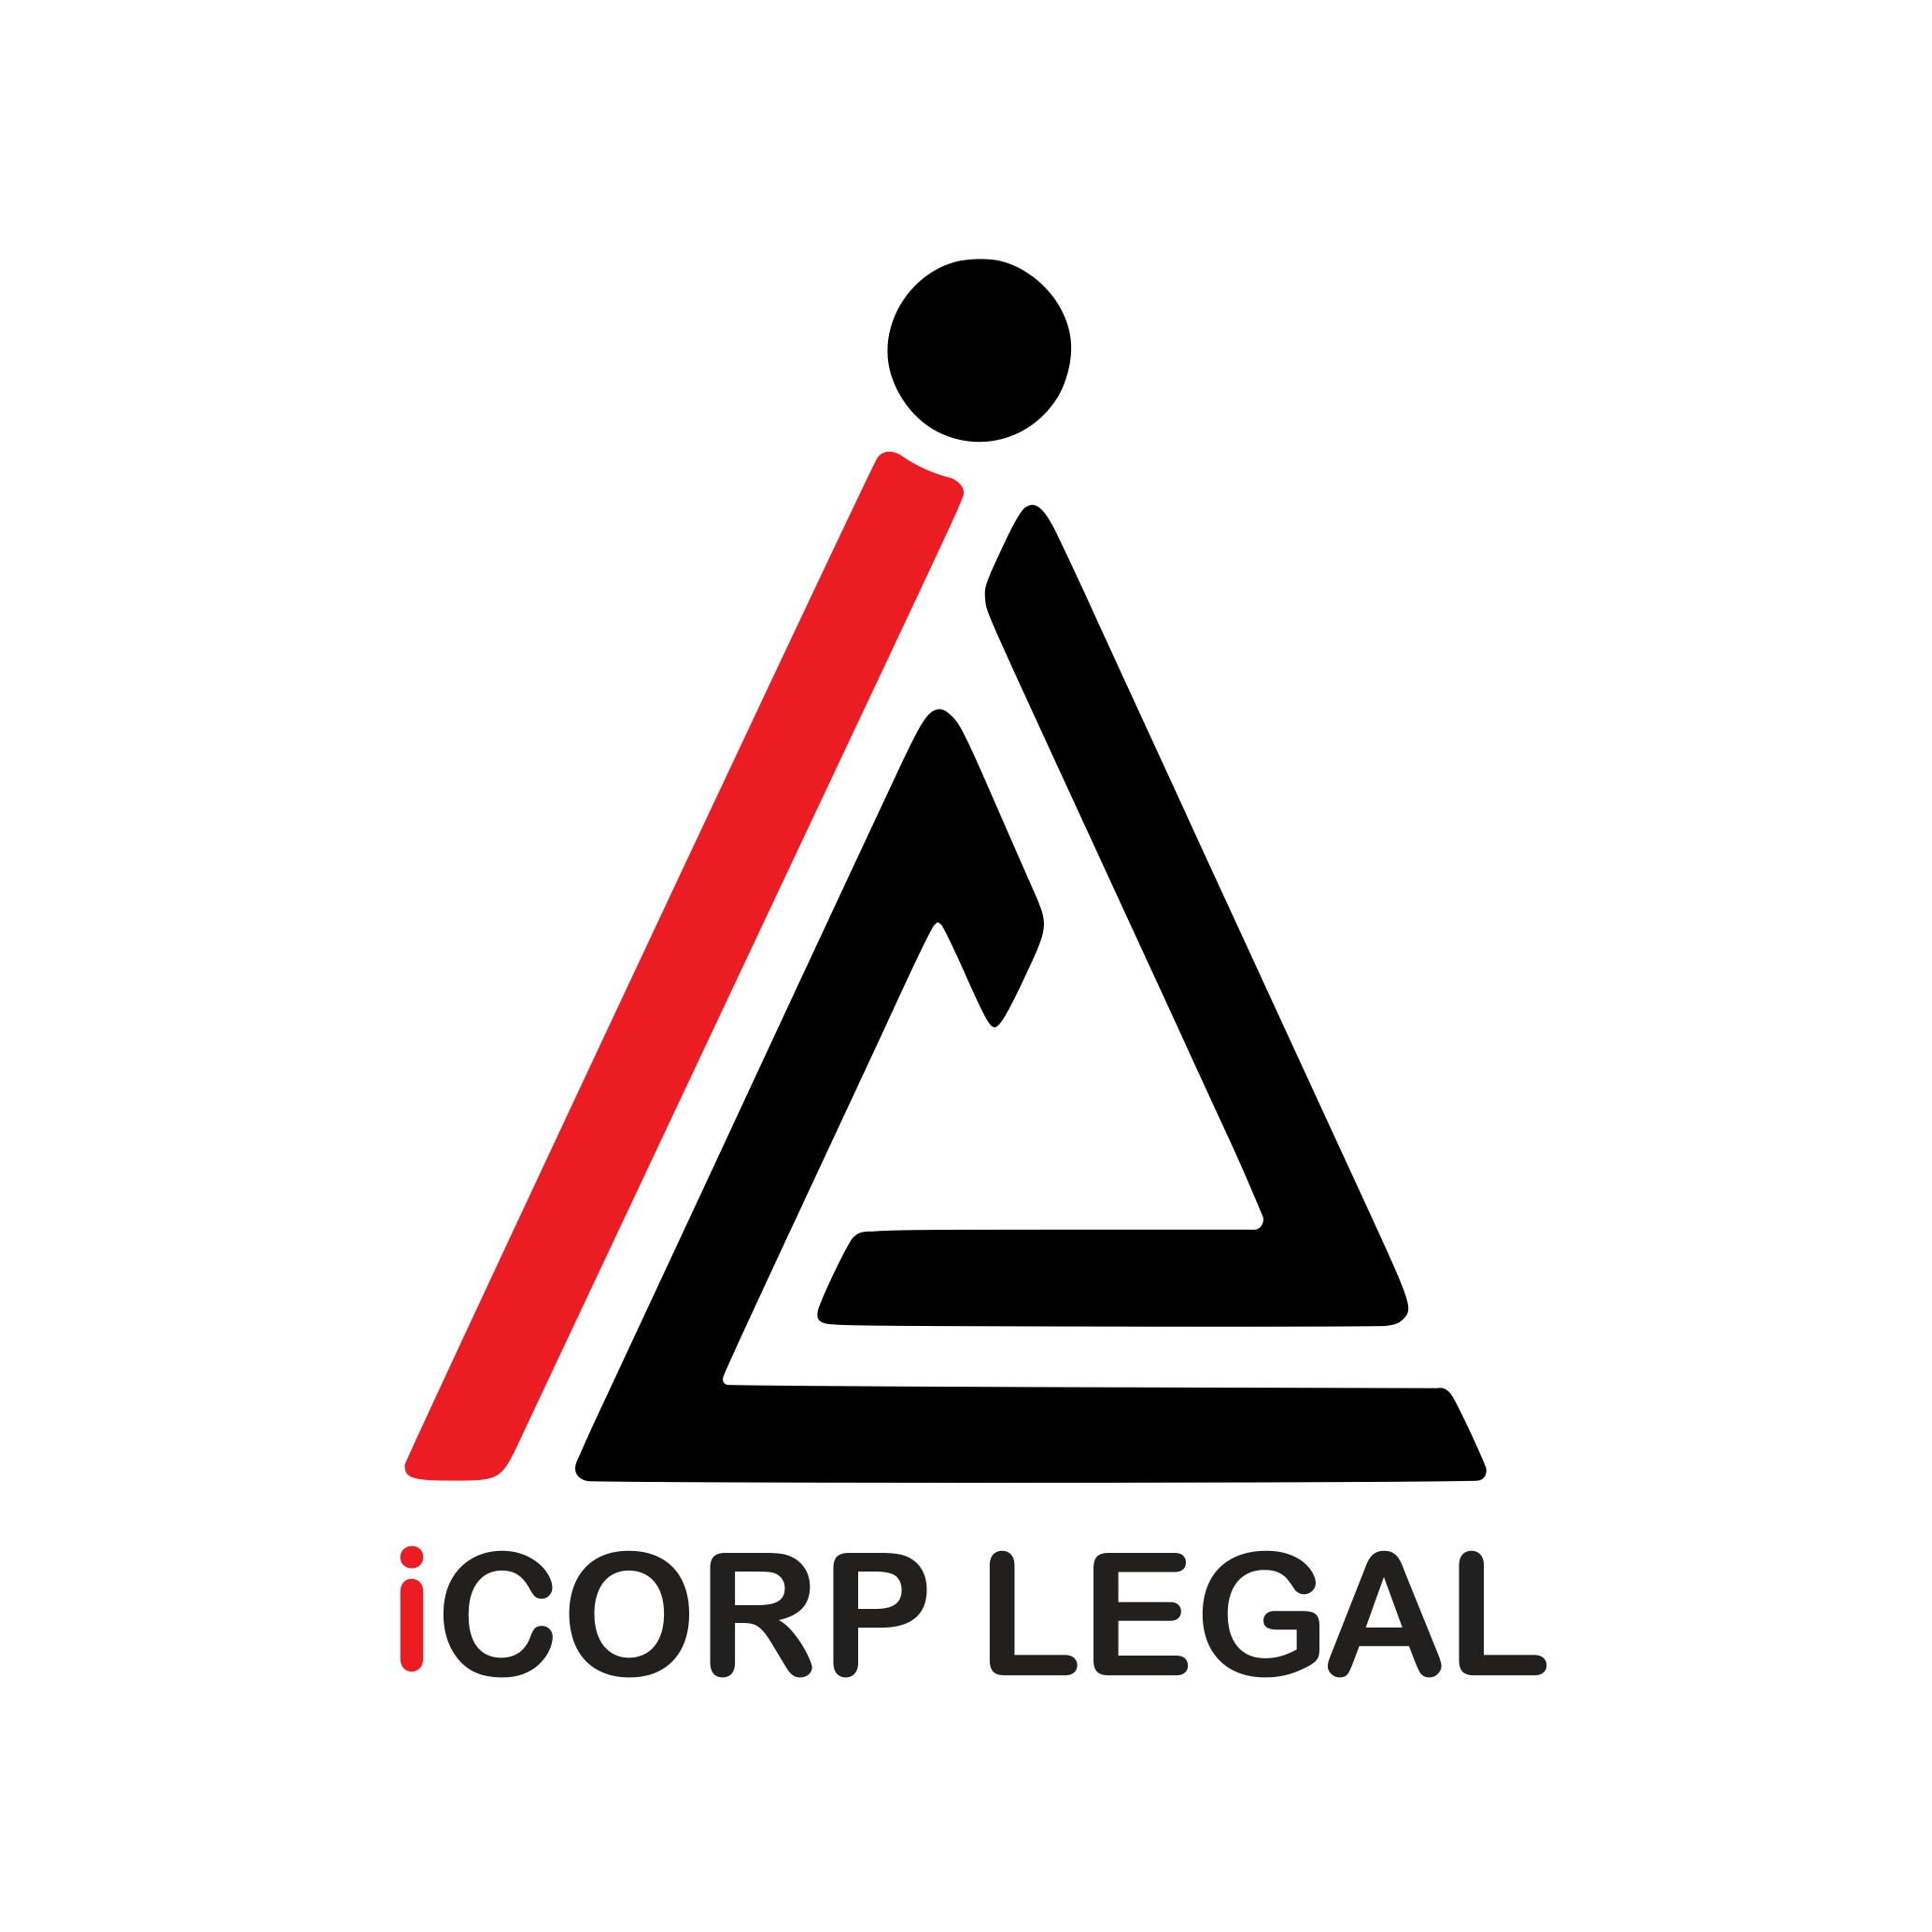 iCORP LEGAL